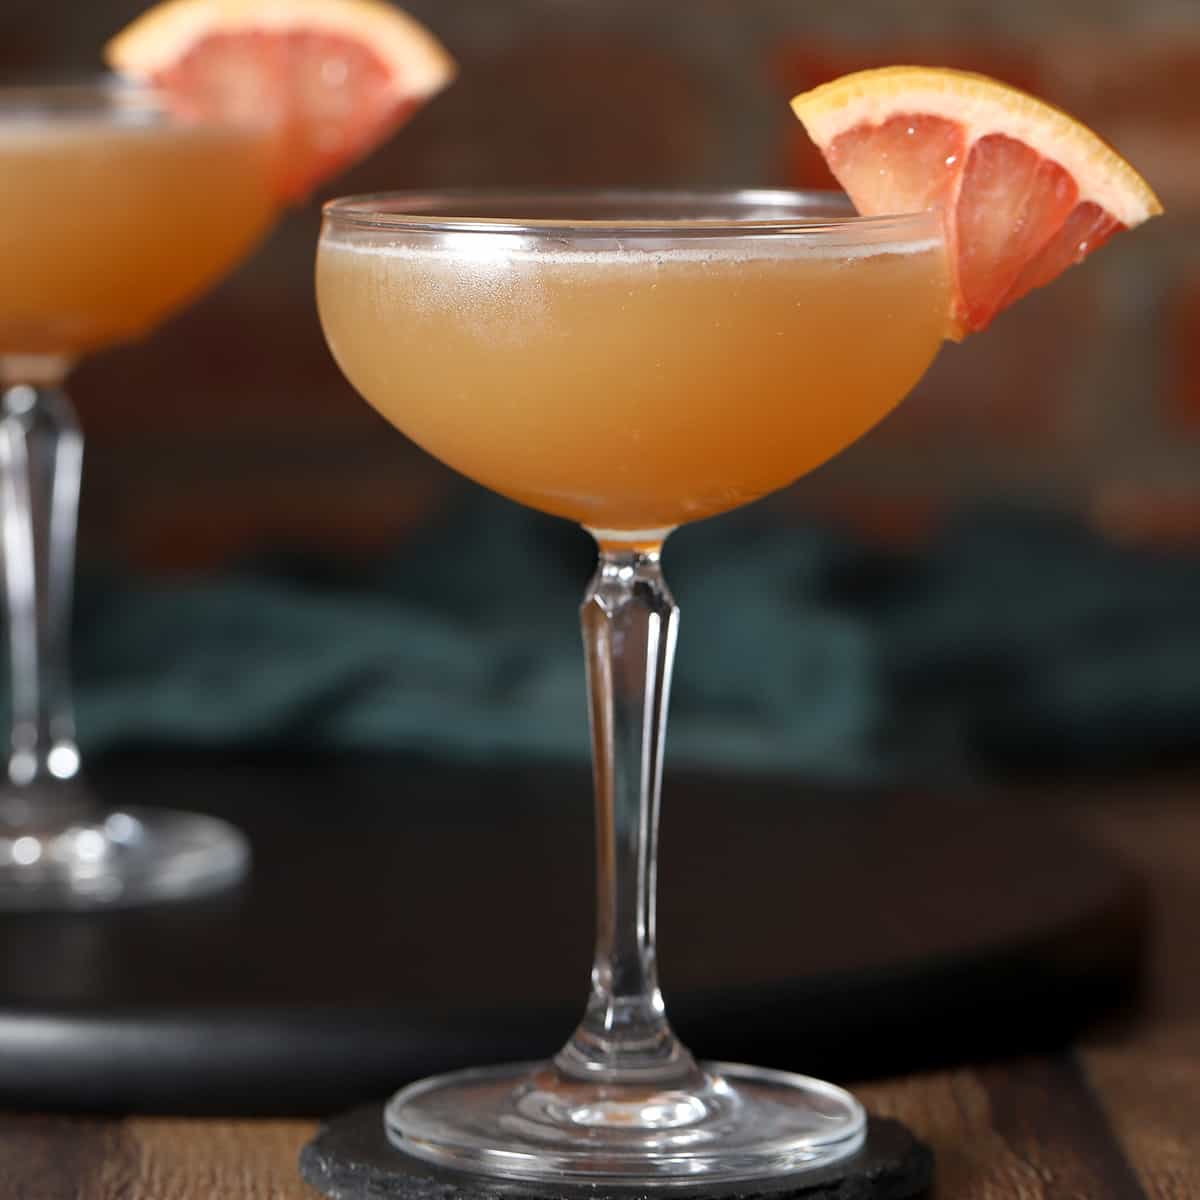 Glasses of brown derby cocktail garnished with grapefruit.